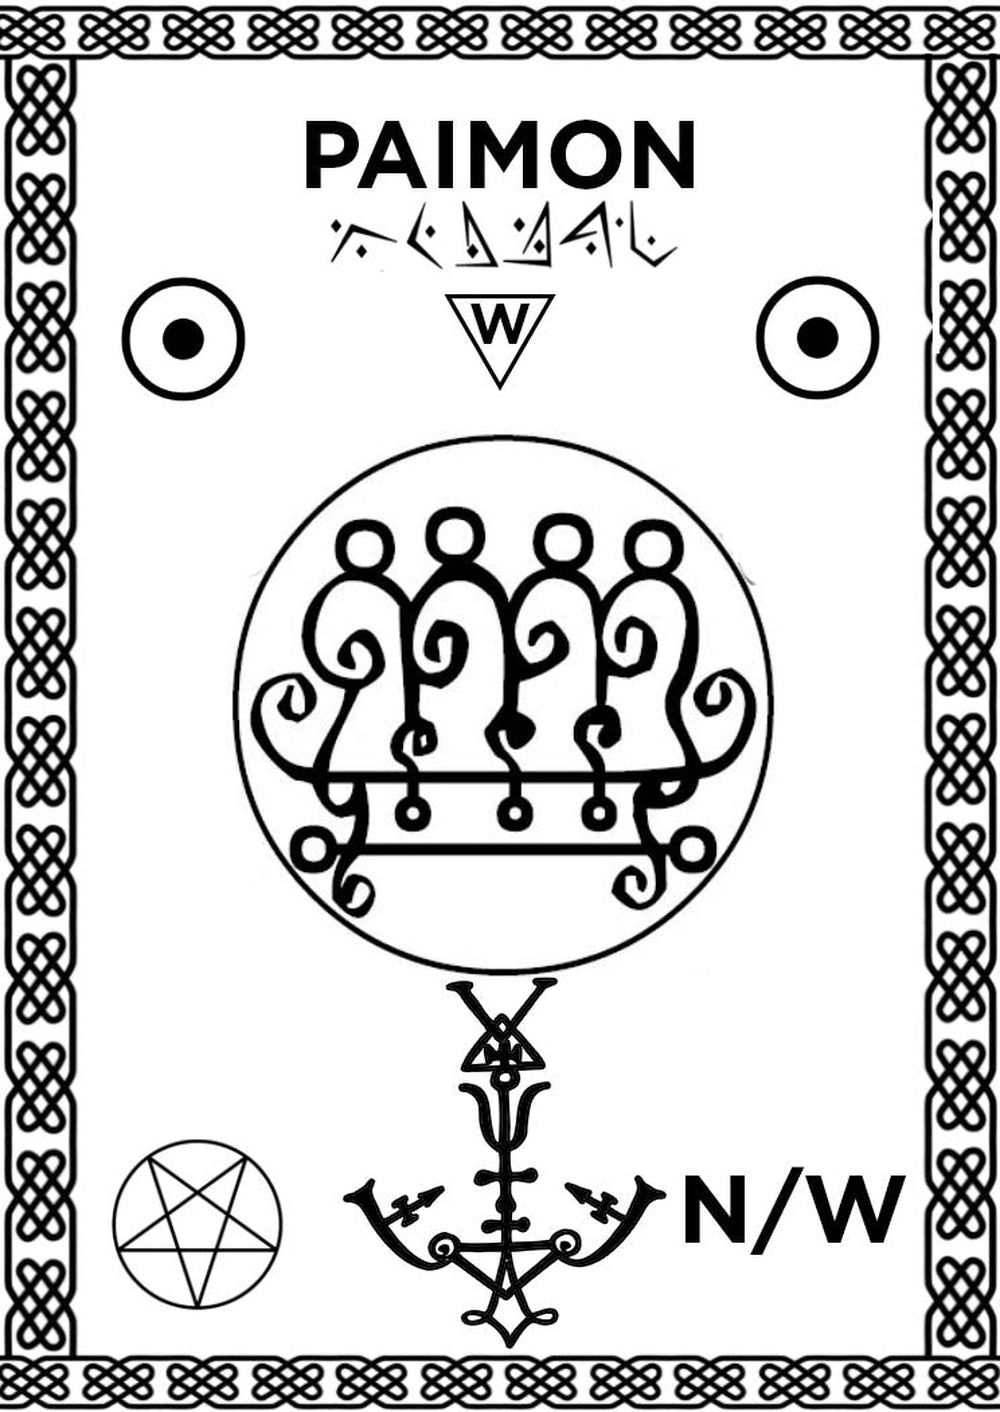 Invocation-Alignment-Pad-with-the-Sigil-of-Paimon-for-home-alter-Witchcraft-2